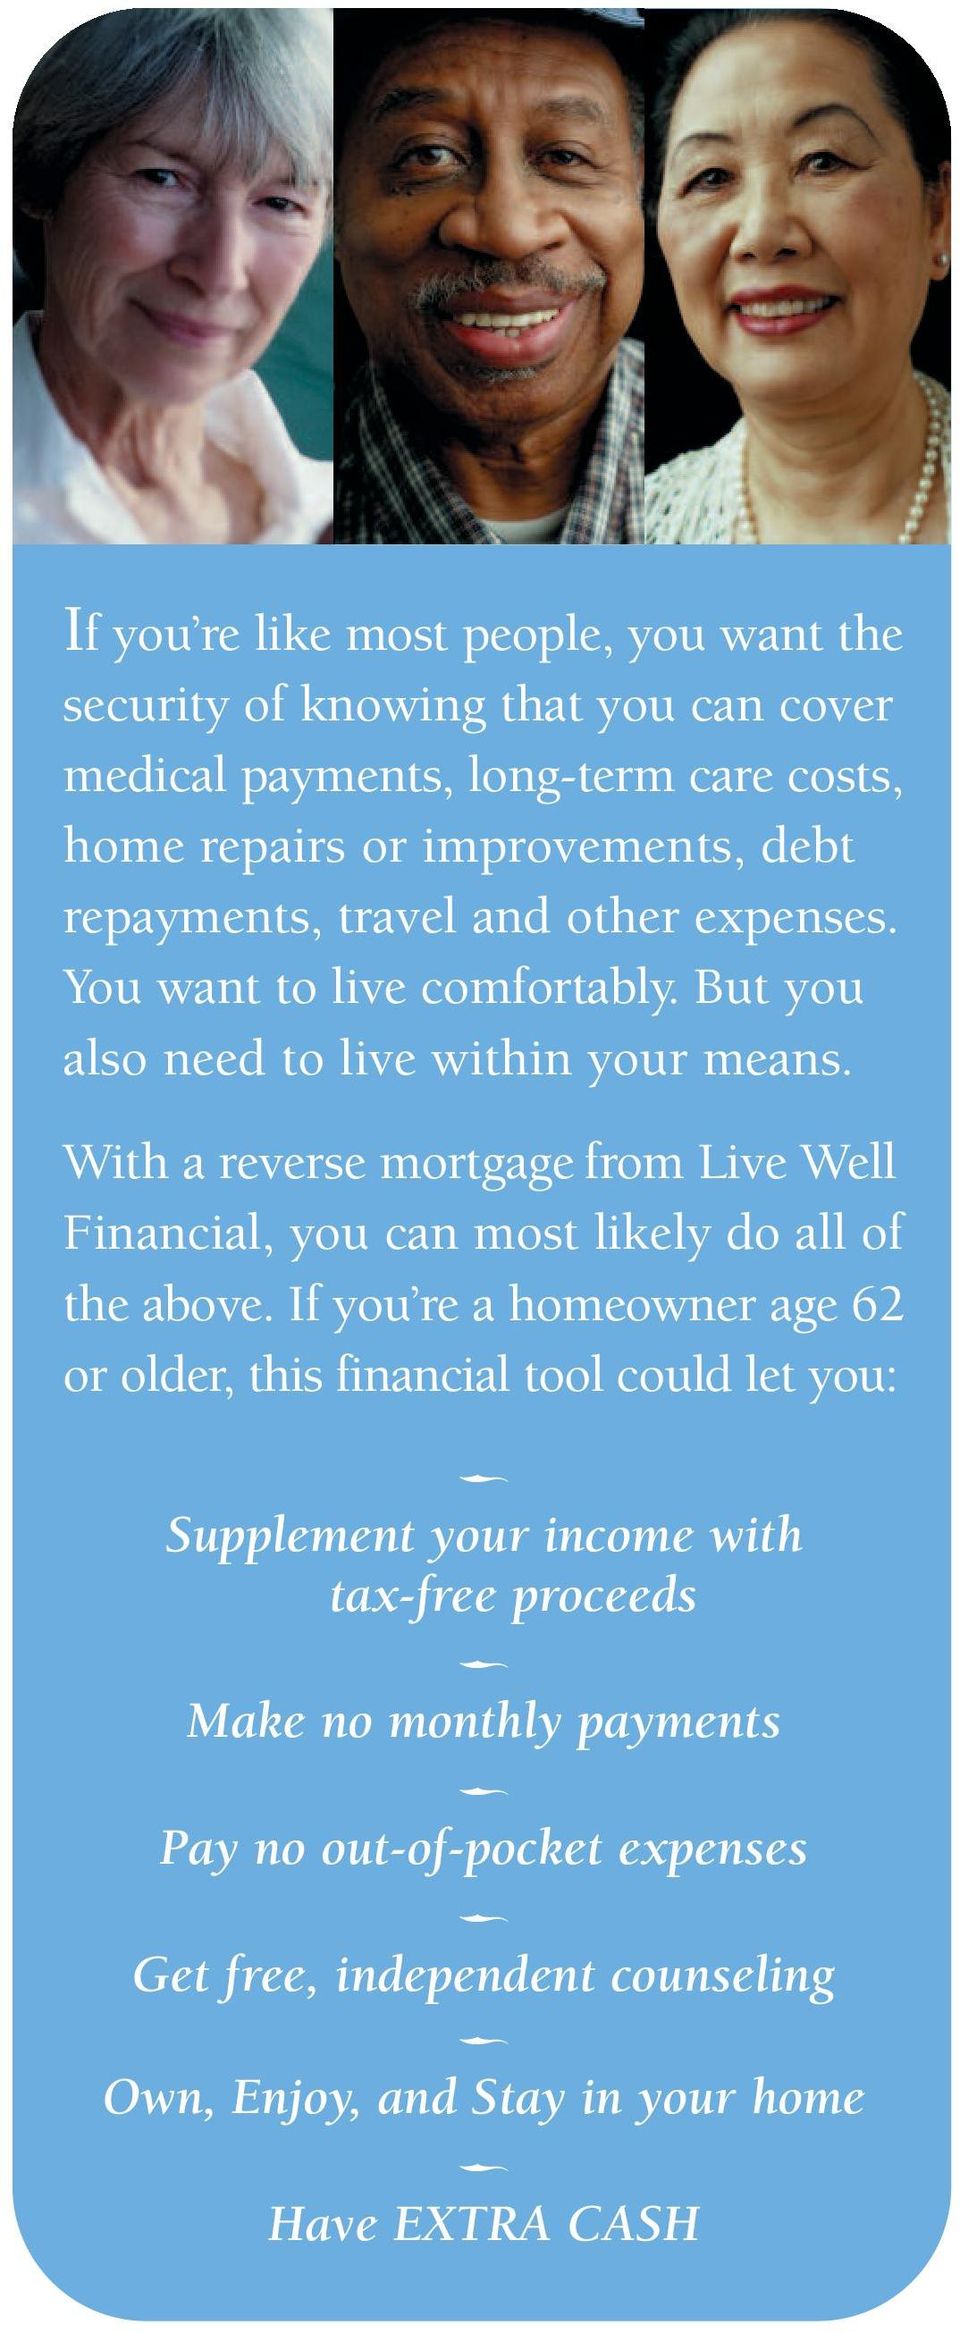 With a reverse mortgage from Live Well Financial, you can most likely do all of the above.